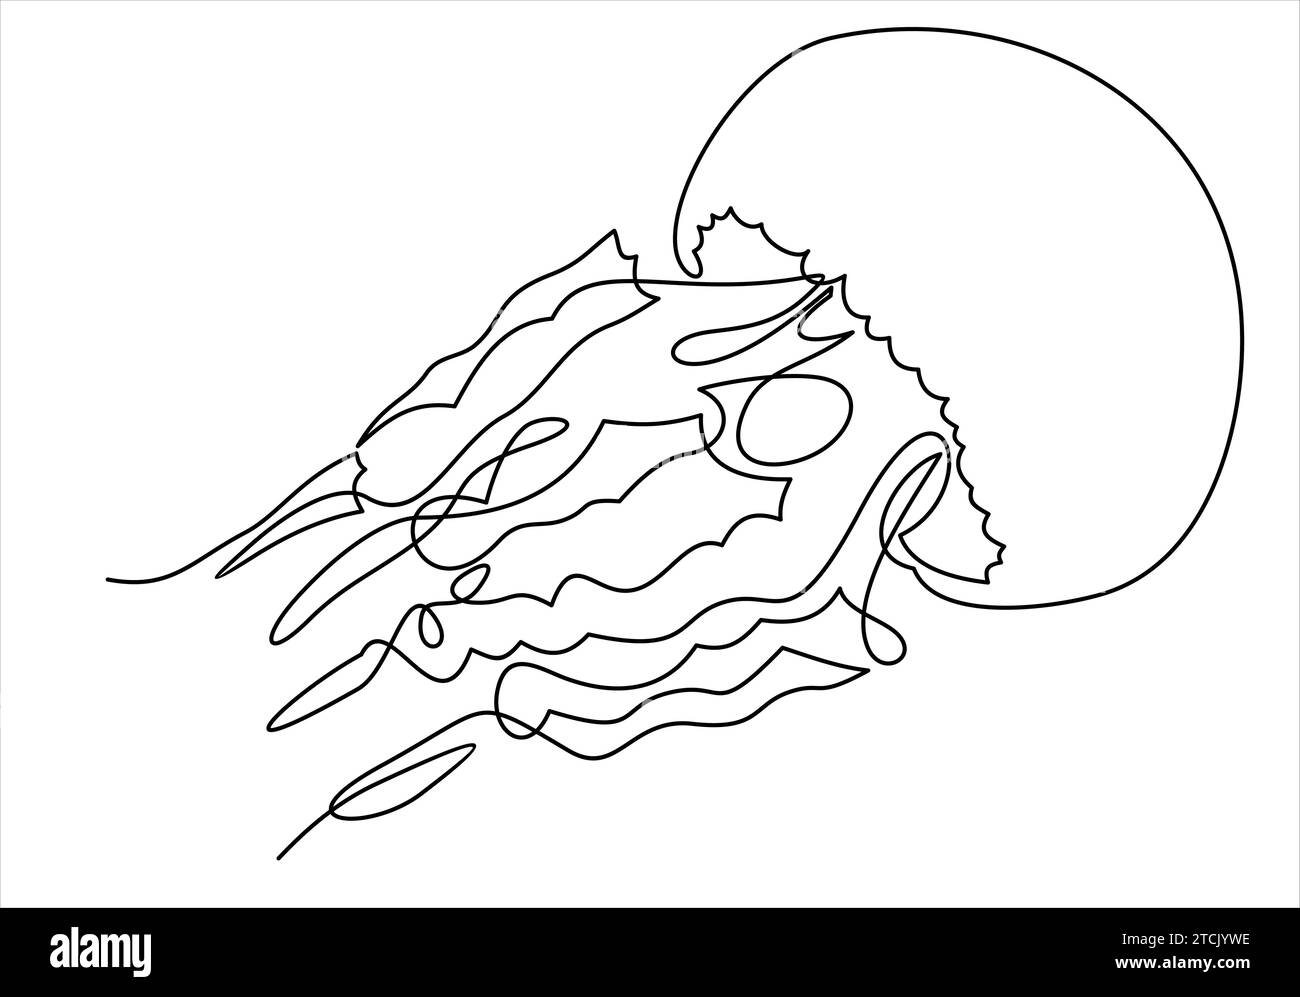 One line jell ifish illustration.Element In Trendy Style. Stock Vector